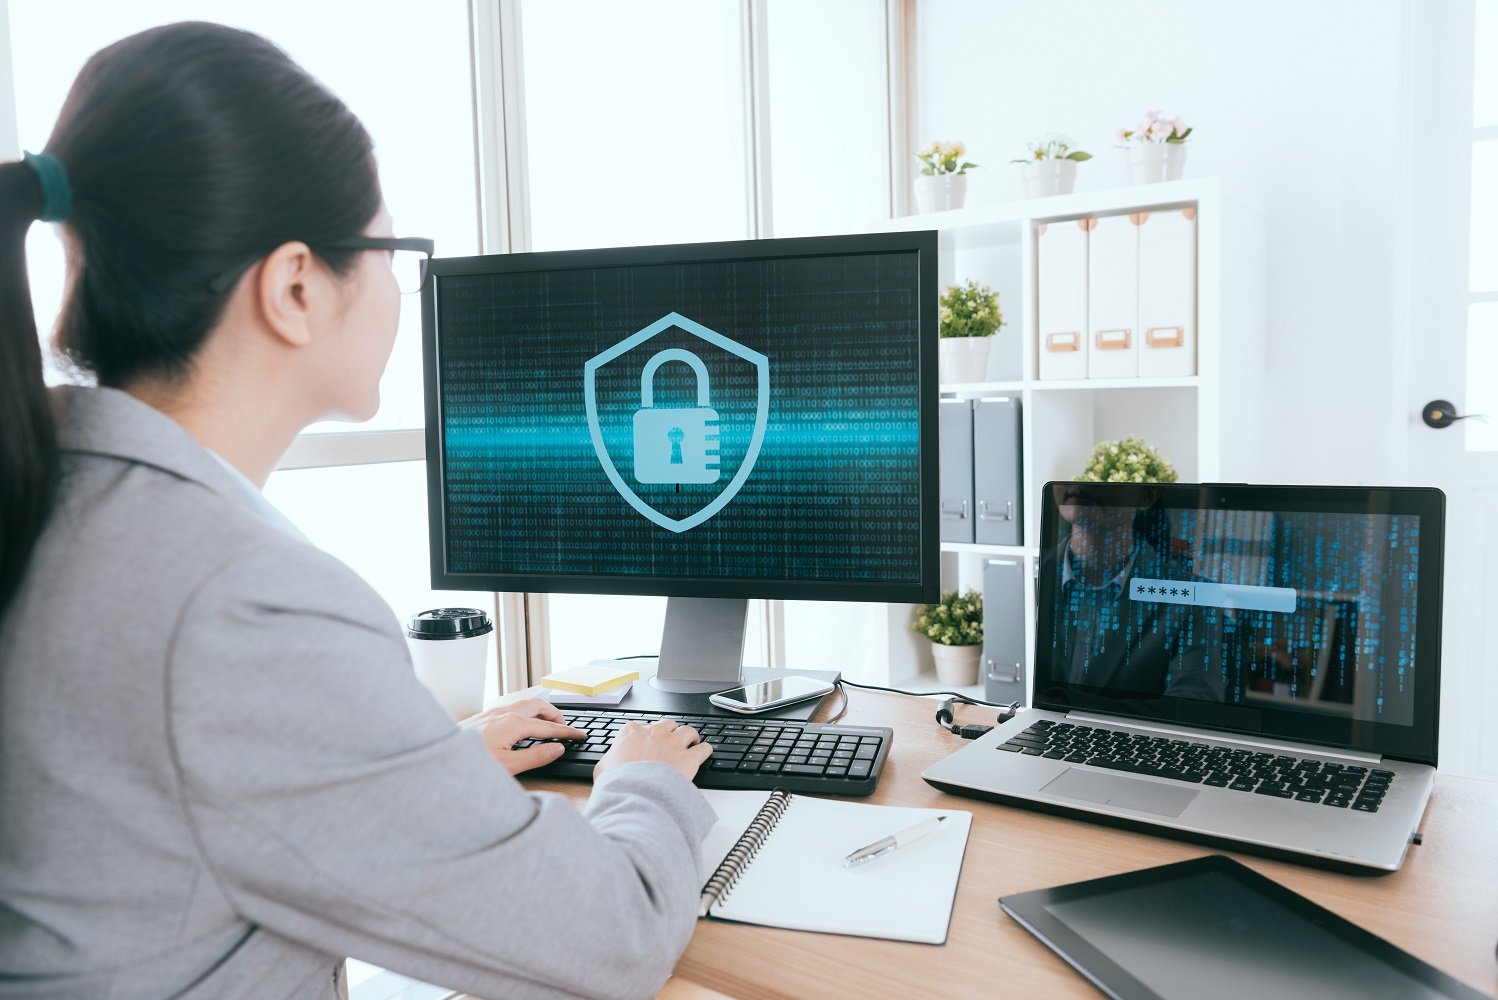 To maintain data security and prevent data breach, companies need to ramp up data loss prevention (DLP) and consider adopting document security solutions.